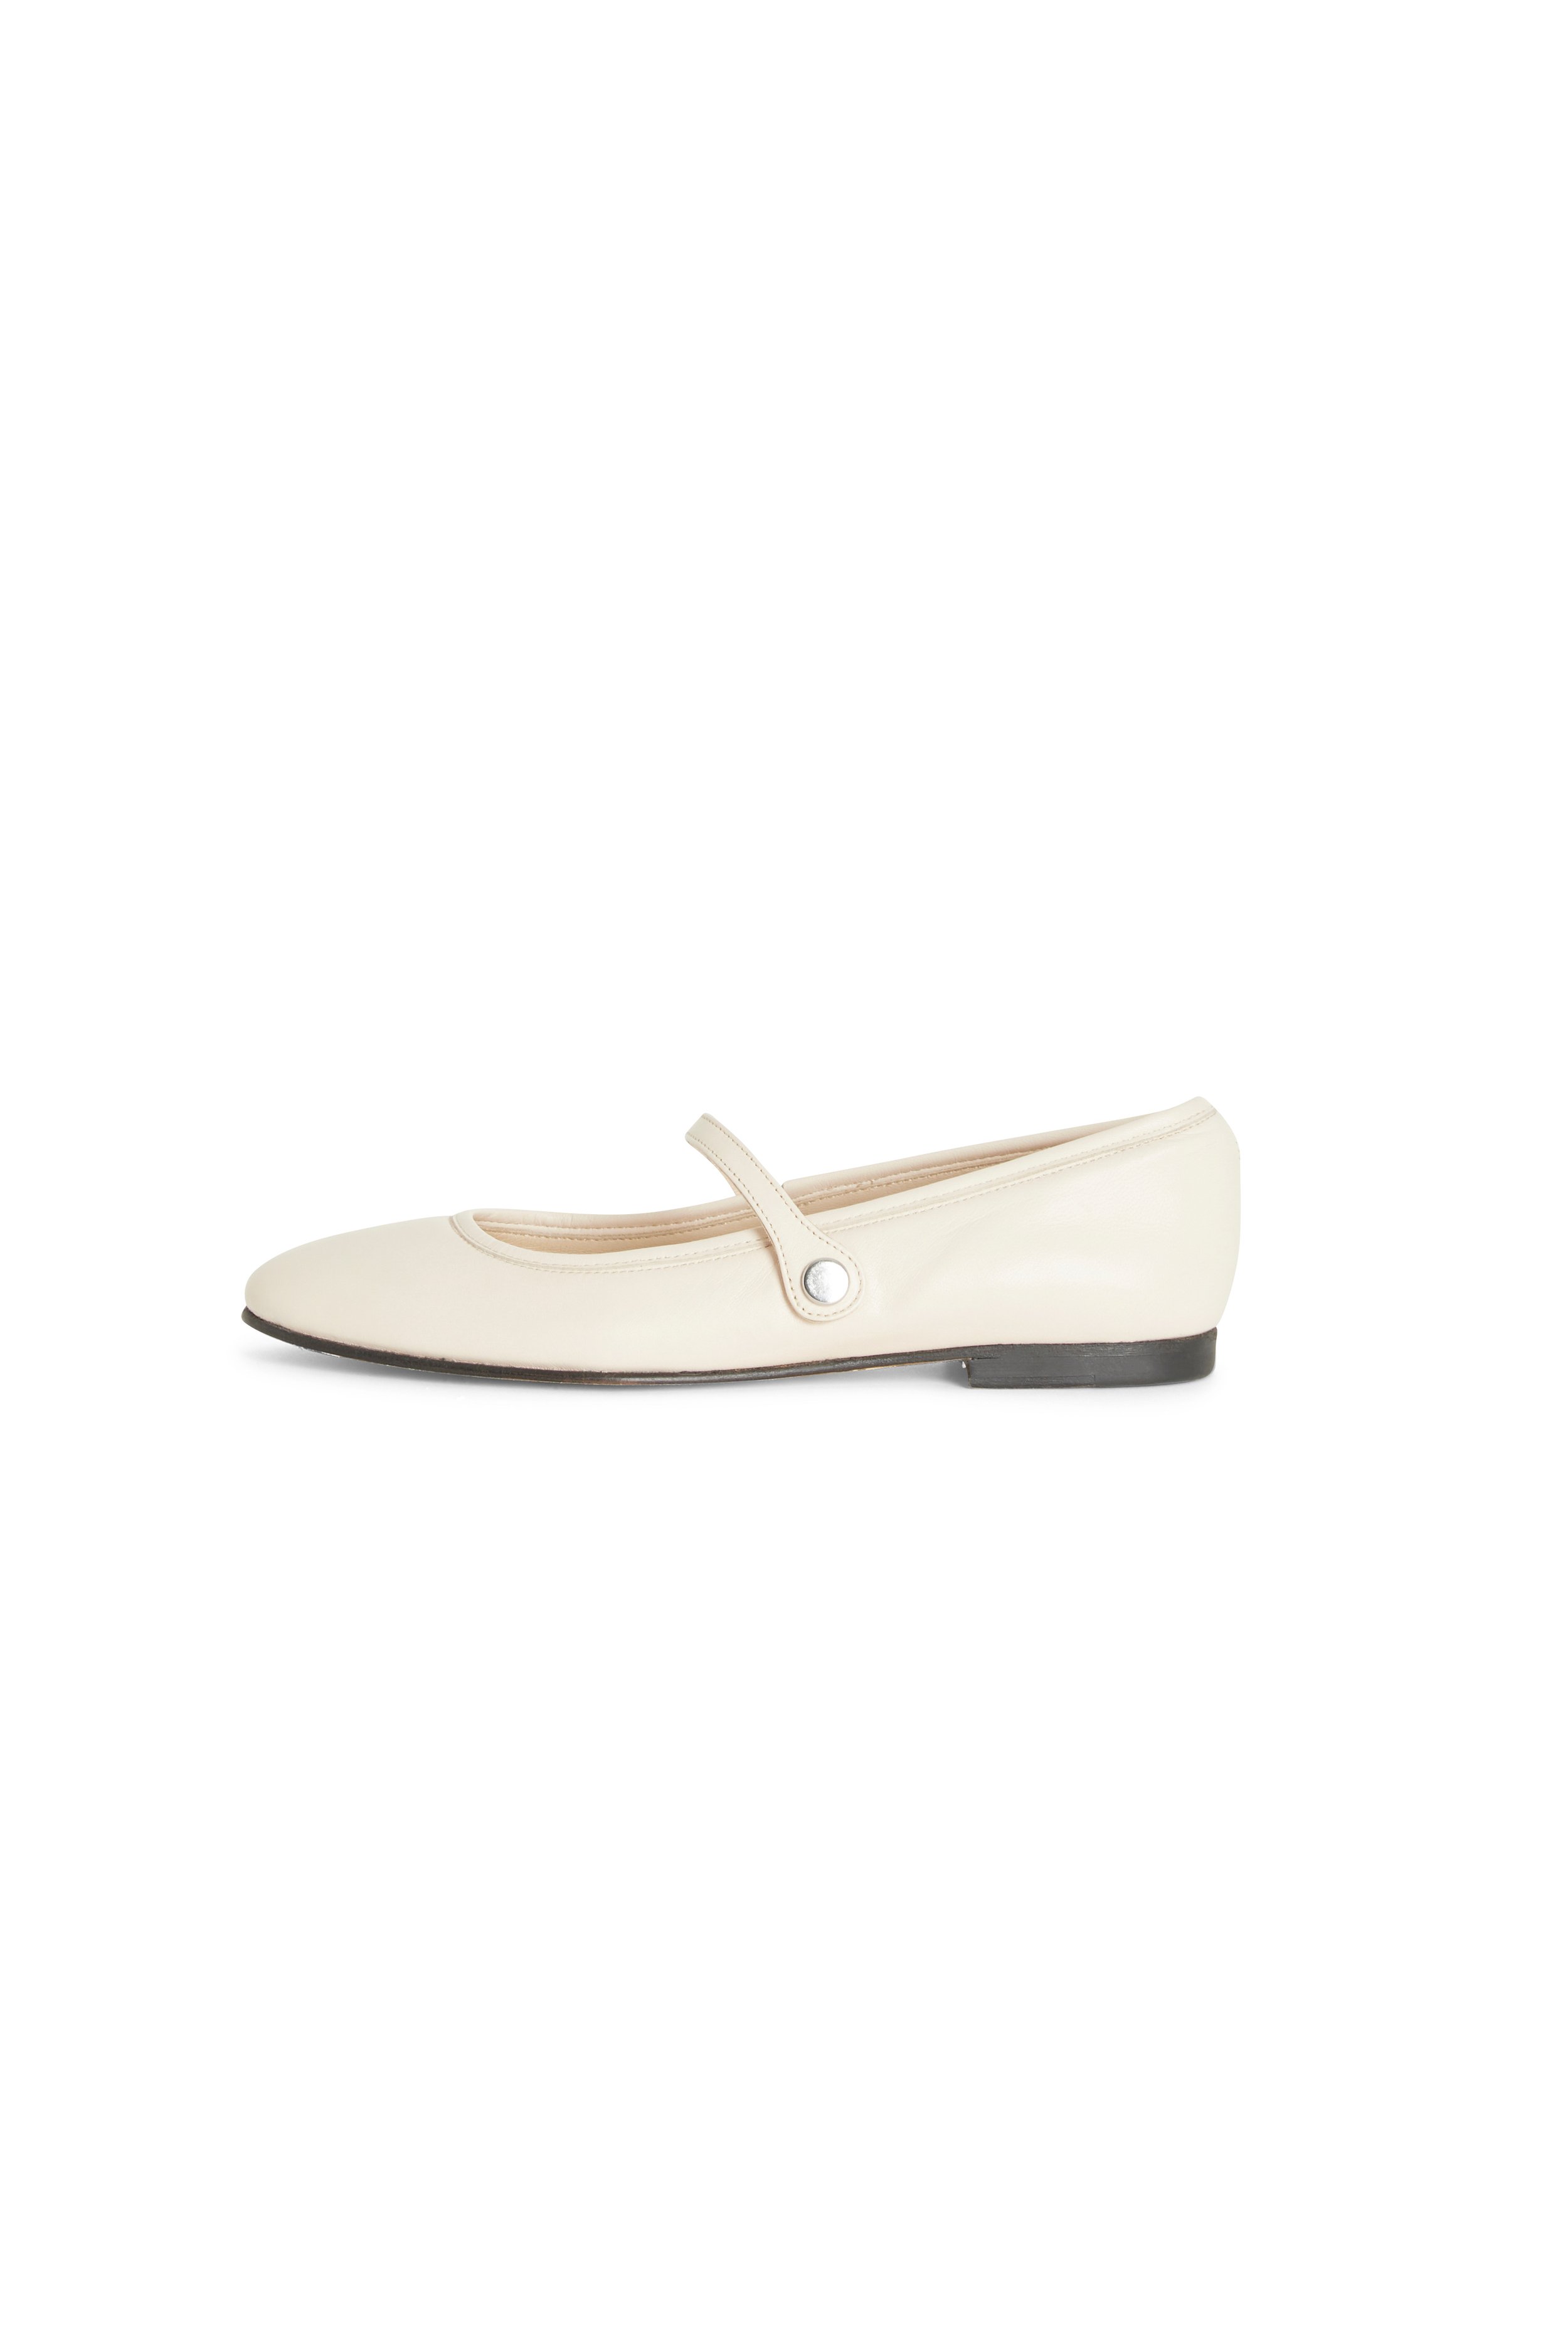 Les Georges - The Adorable Must-Have Mary Jane Flats We All Want This ...